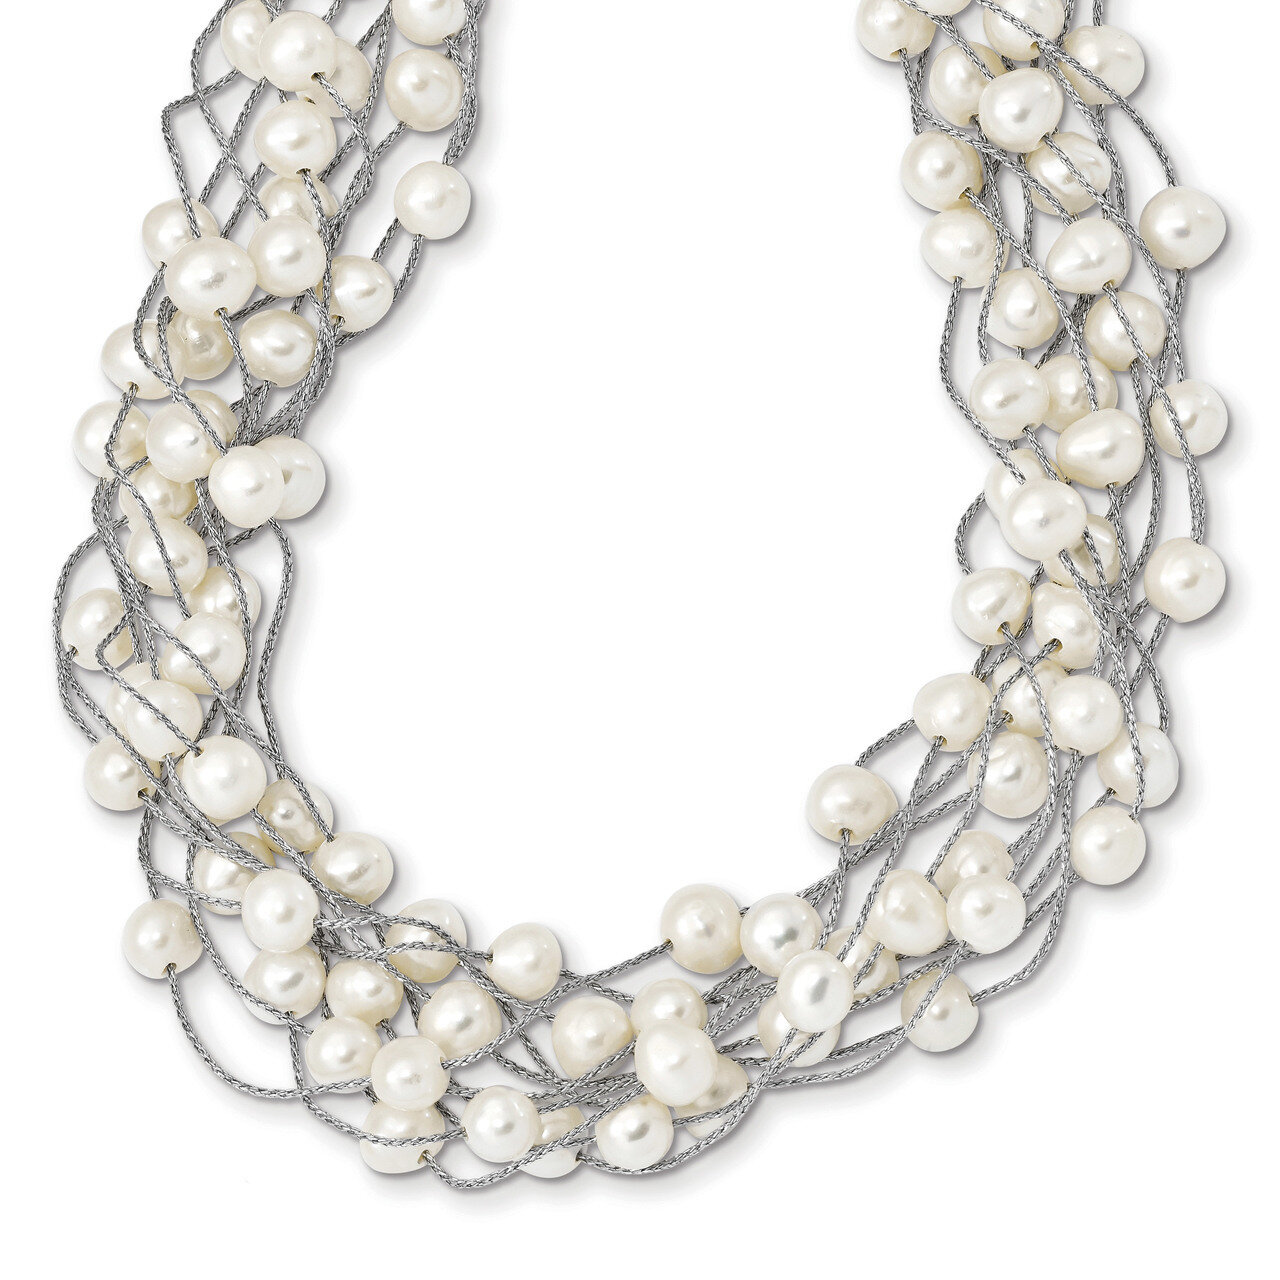 6-8mm White Cultured Freshwater Pearl Multi-strand Necklace 17.5 Inch Sterling Silver Rhodium-plated QH5410-15